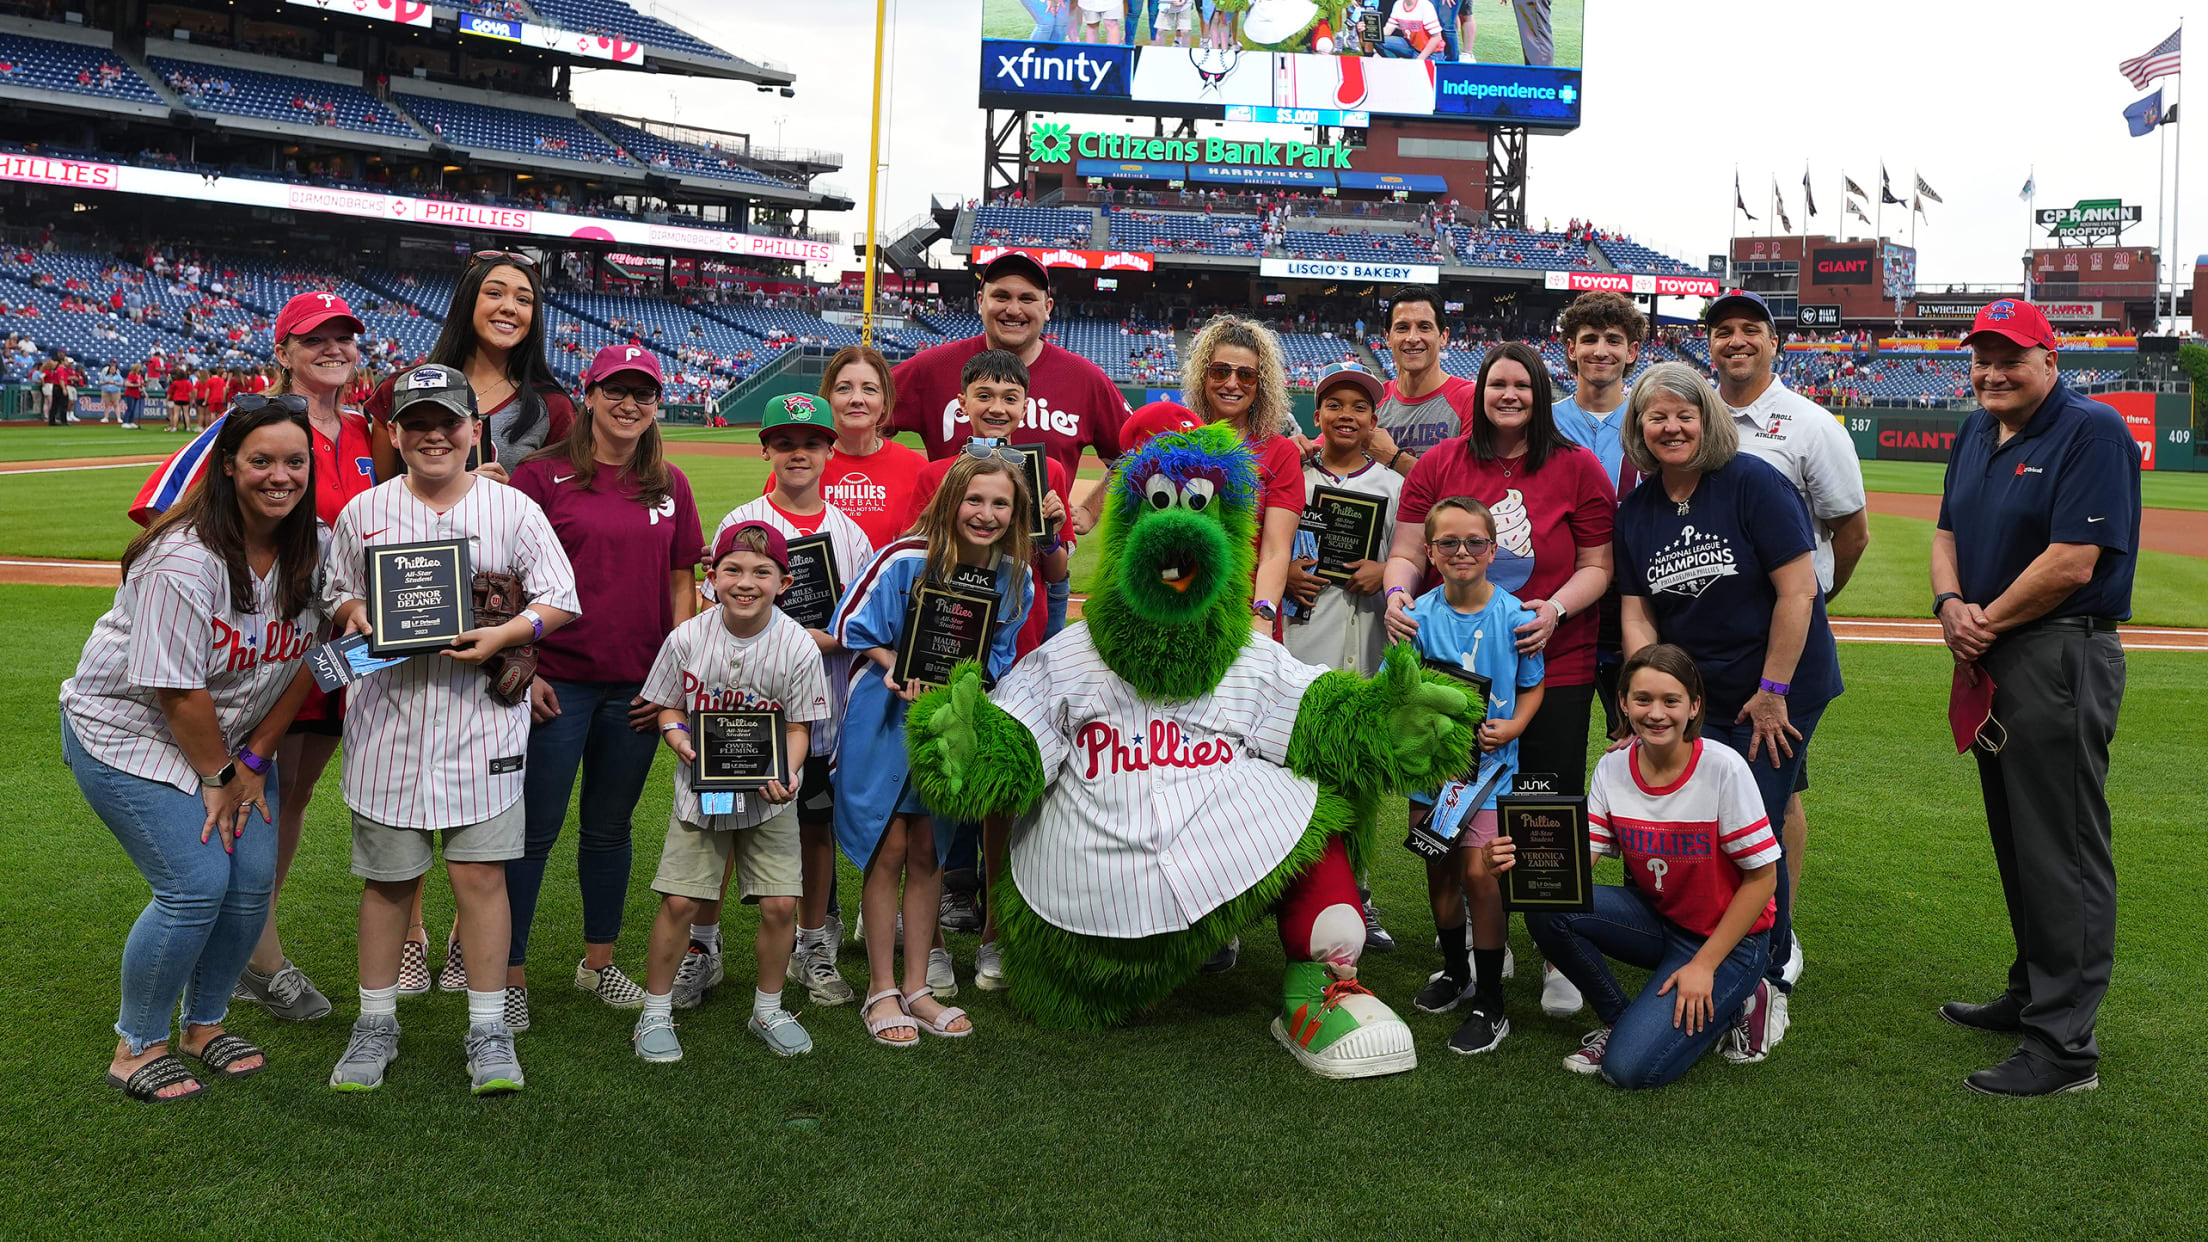 Philadelphia Phillies - Fans standing with Phillies alumni and